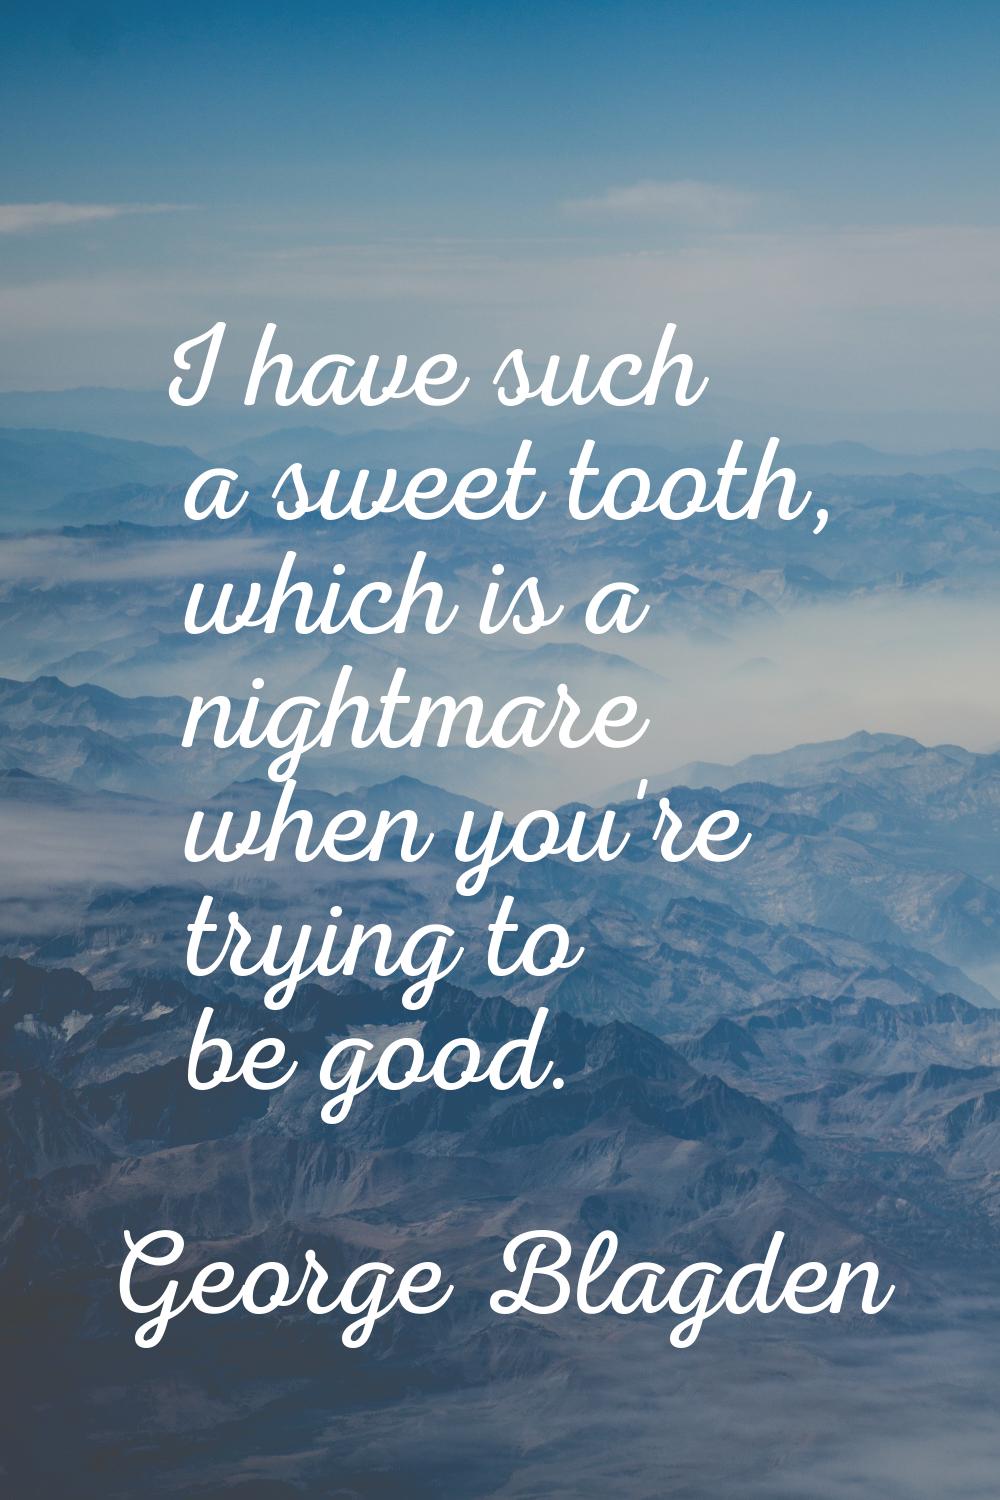 I have such a sweet tooth, which is a nightmare when you're trying to be good.